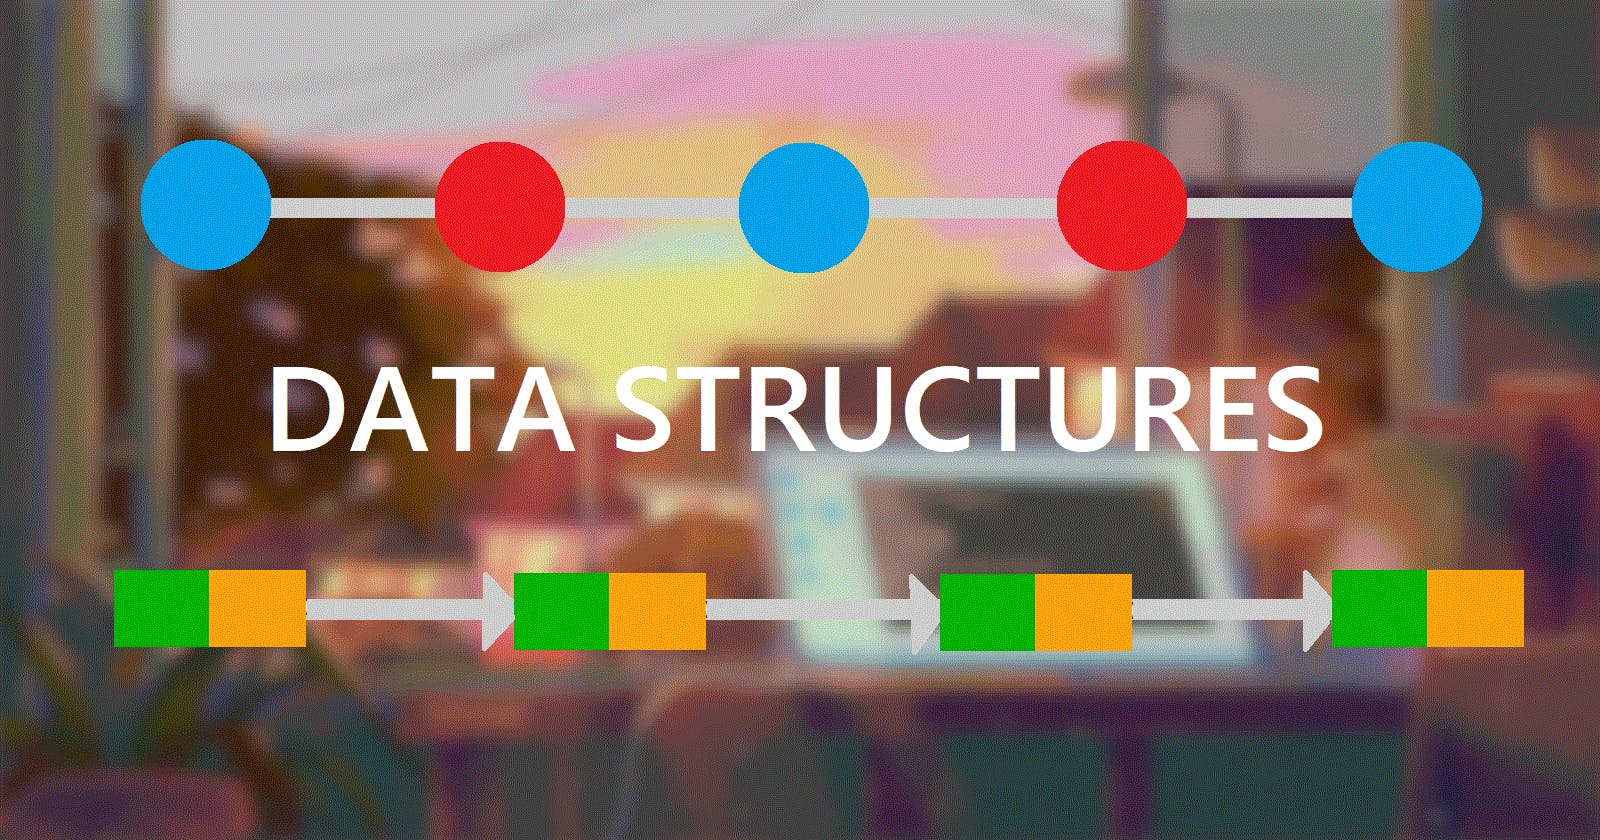 Data Structures: The starting